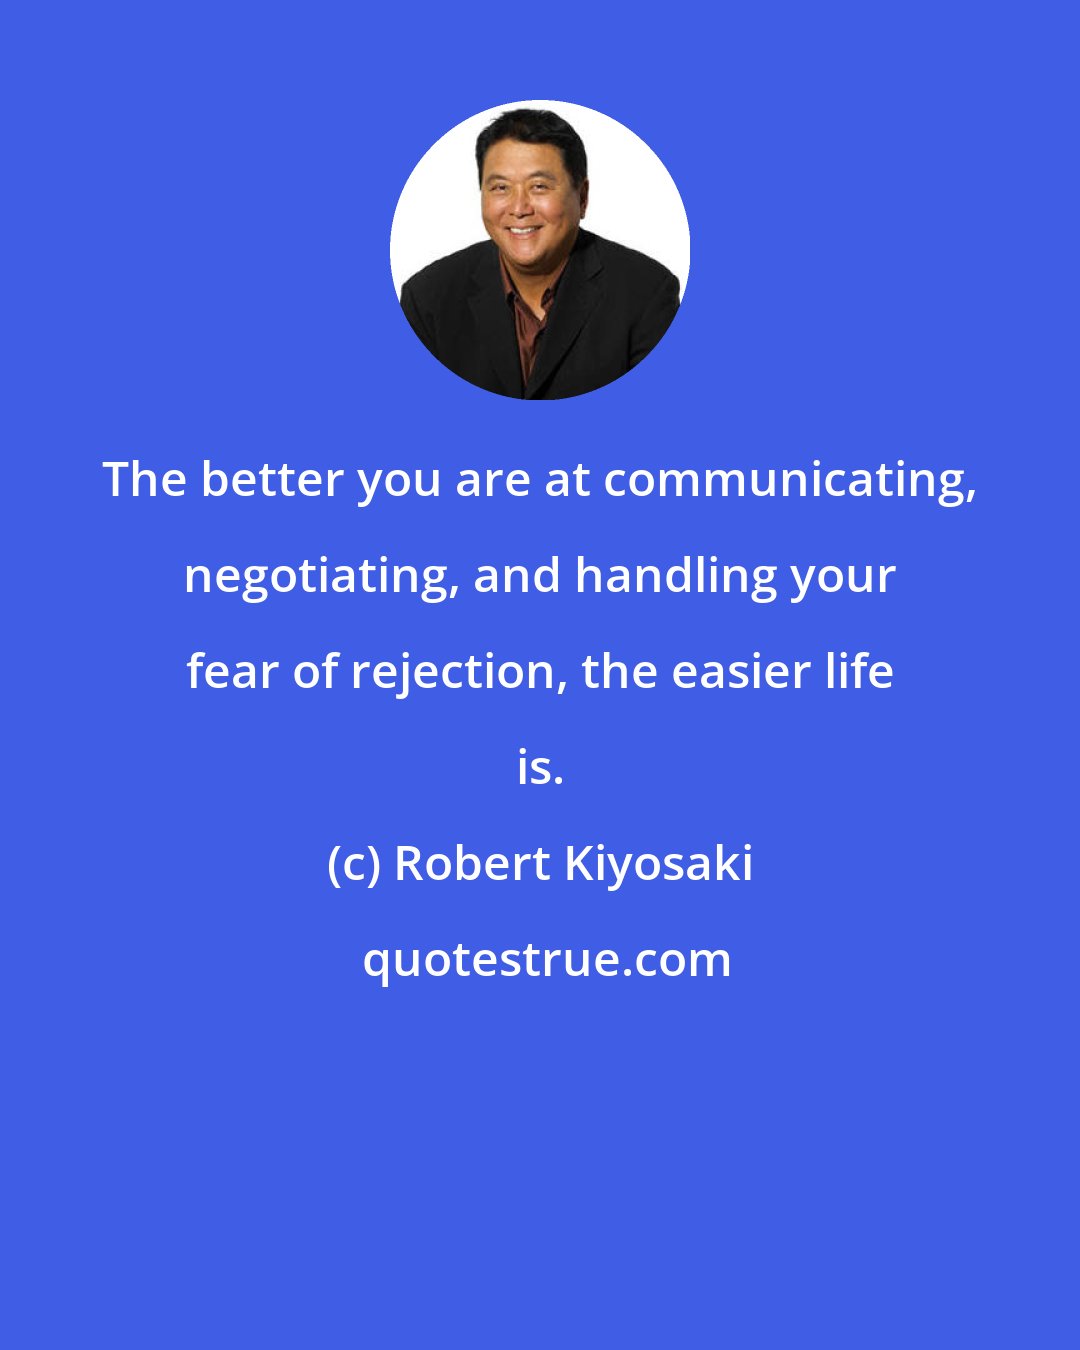 Robert Kiyosaki: The better you are at communicating, negotiating, and handling your fear of rejection, the easier life is.